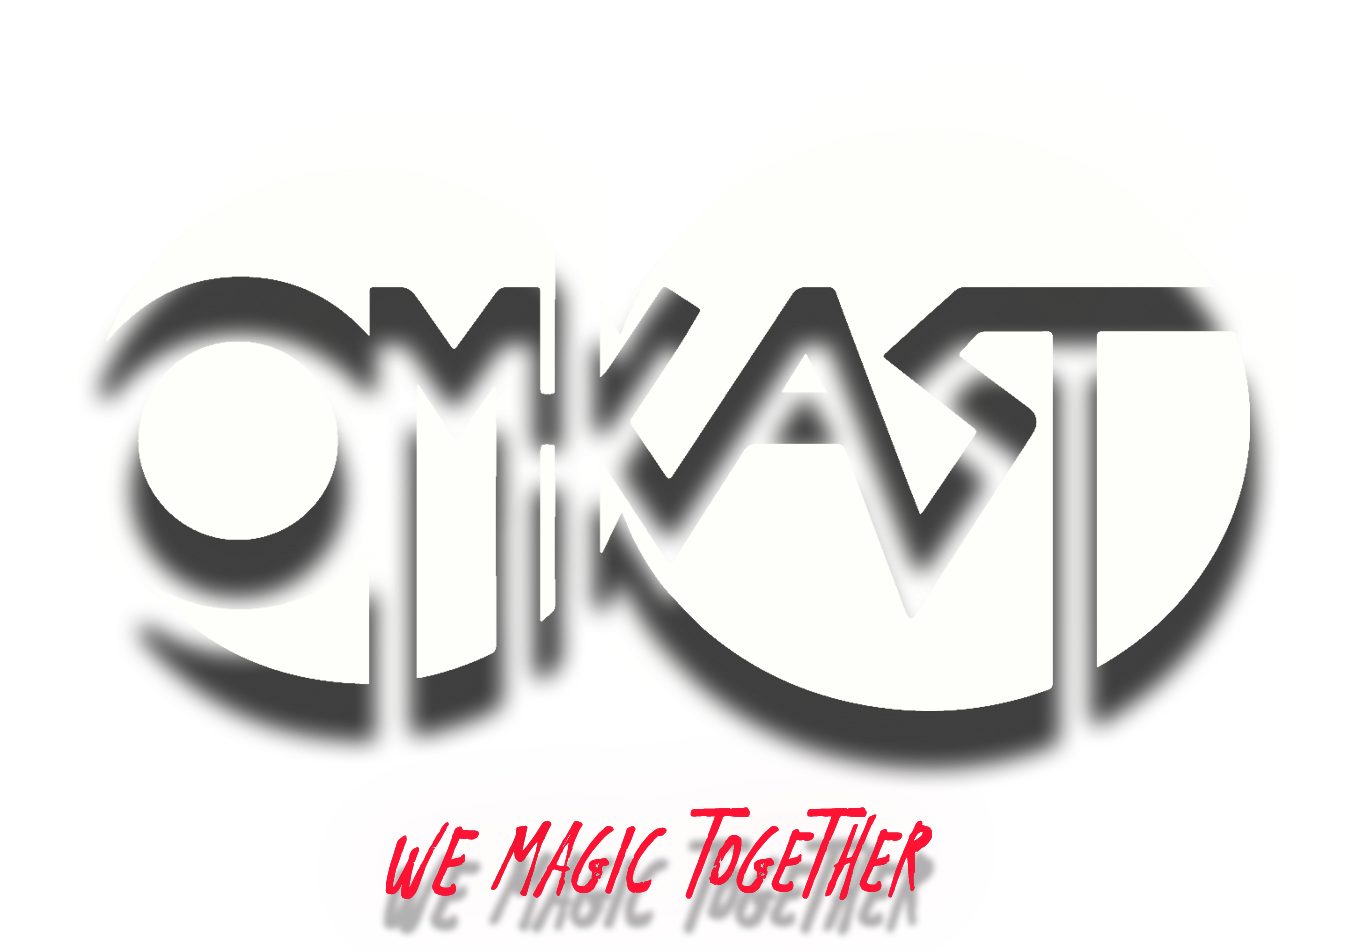 OMKAST - Singer- Songwriter - Producer Custom Online Mixing & Mastering services and Production